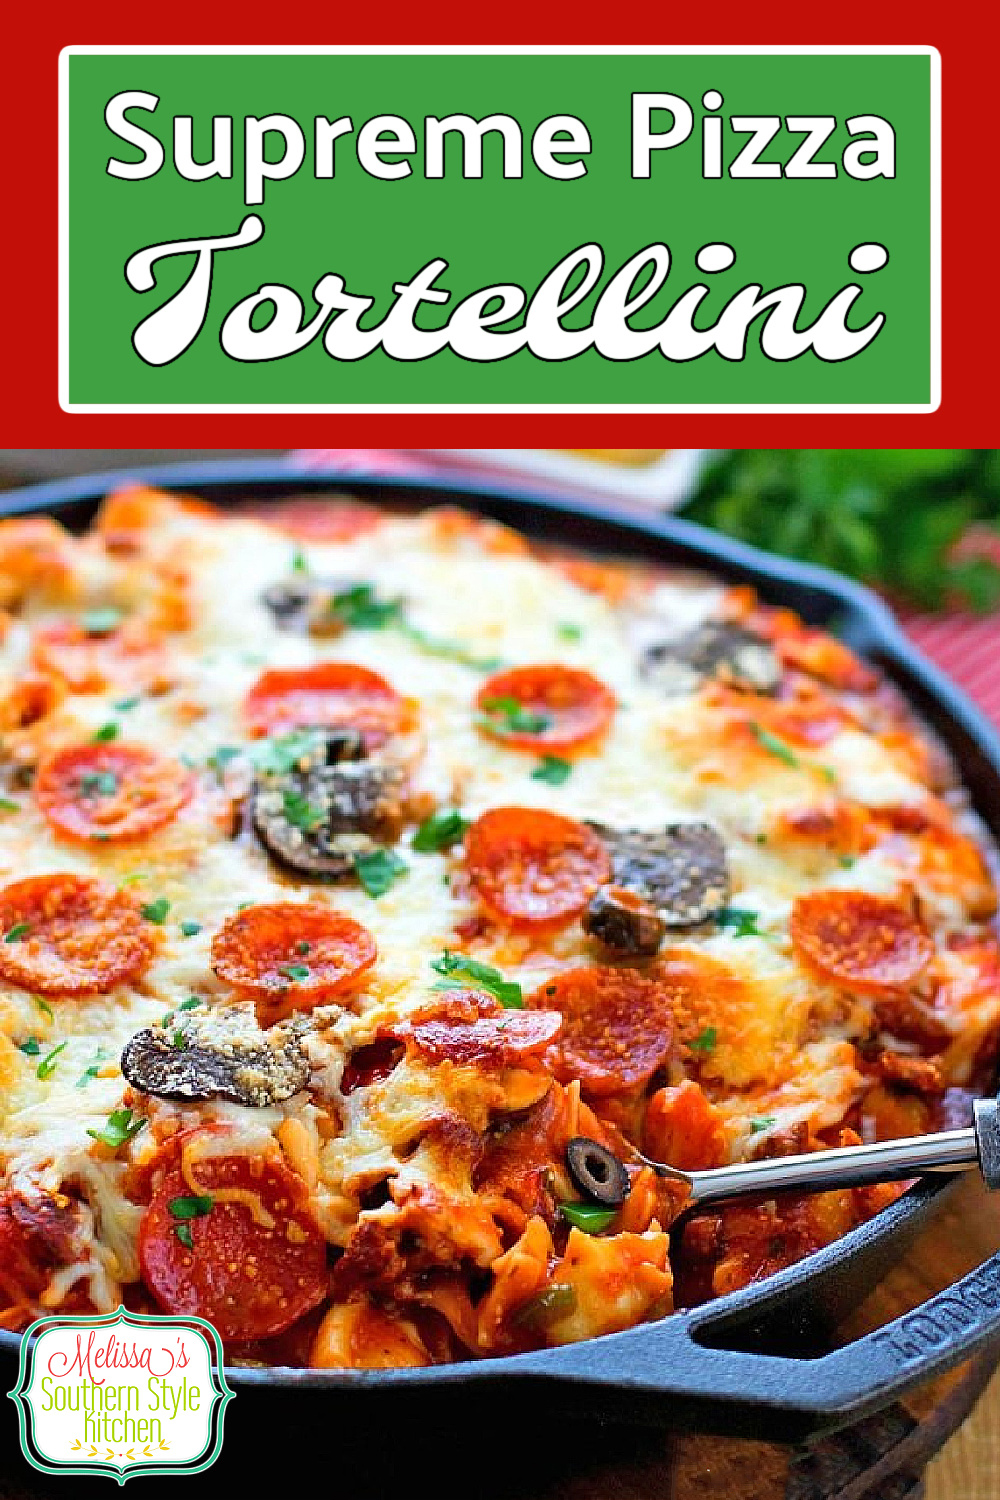 This cheese tortellini bake is a mash-up of pasta and supreme pizza rolled into one delectable meal #supremepizza #supremepizzapasta #cheesetortellini #cheese #pastarecipes #tortellini #casseroles #pasta #dinner #dinnerideas #italianfood #southernrecipes #southernfood #italiansausage